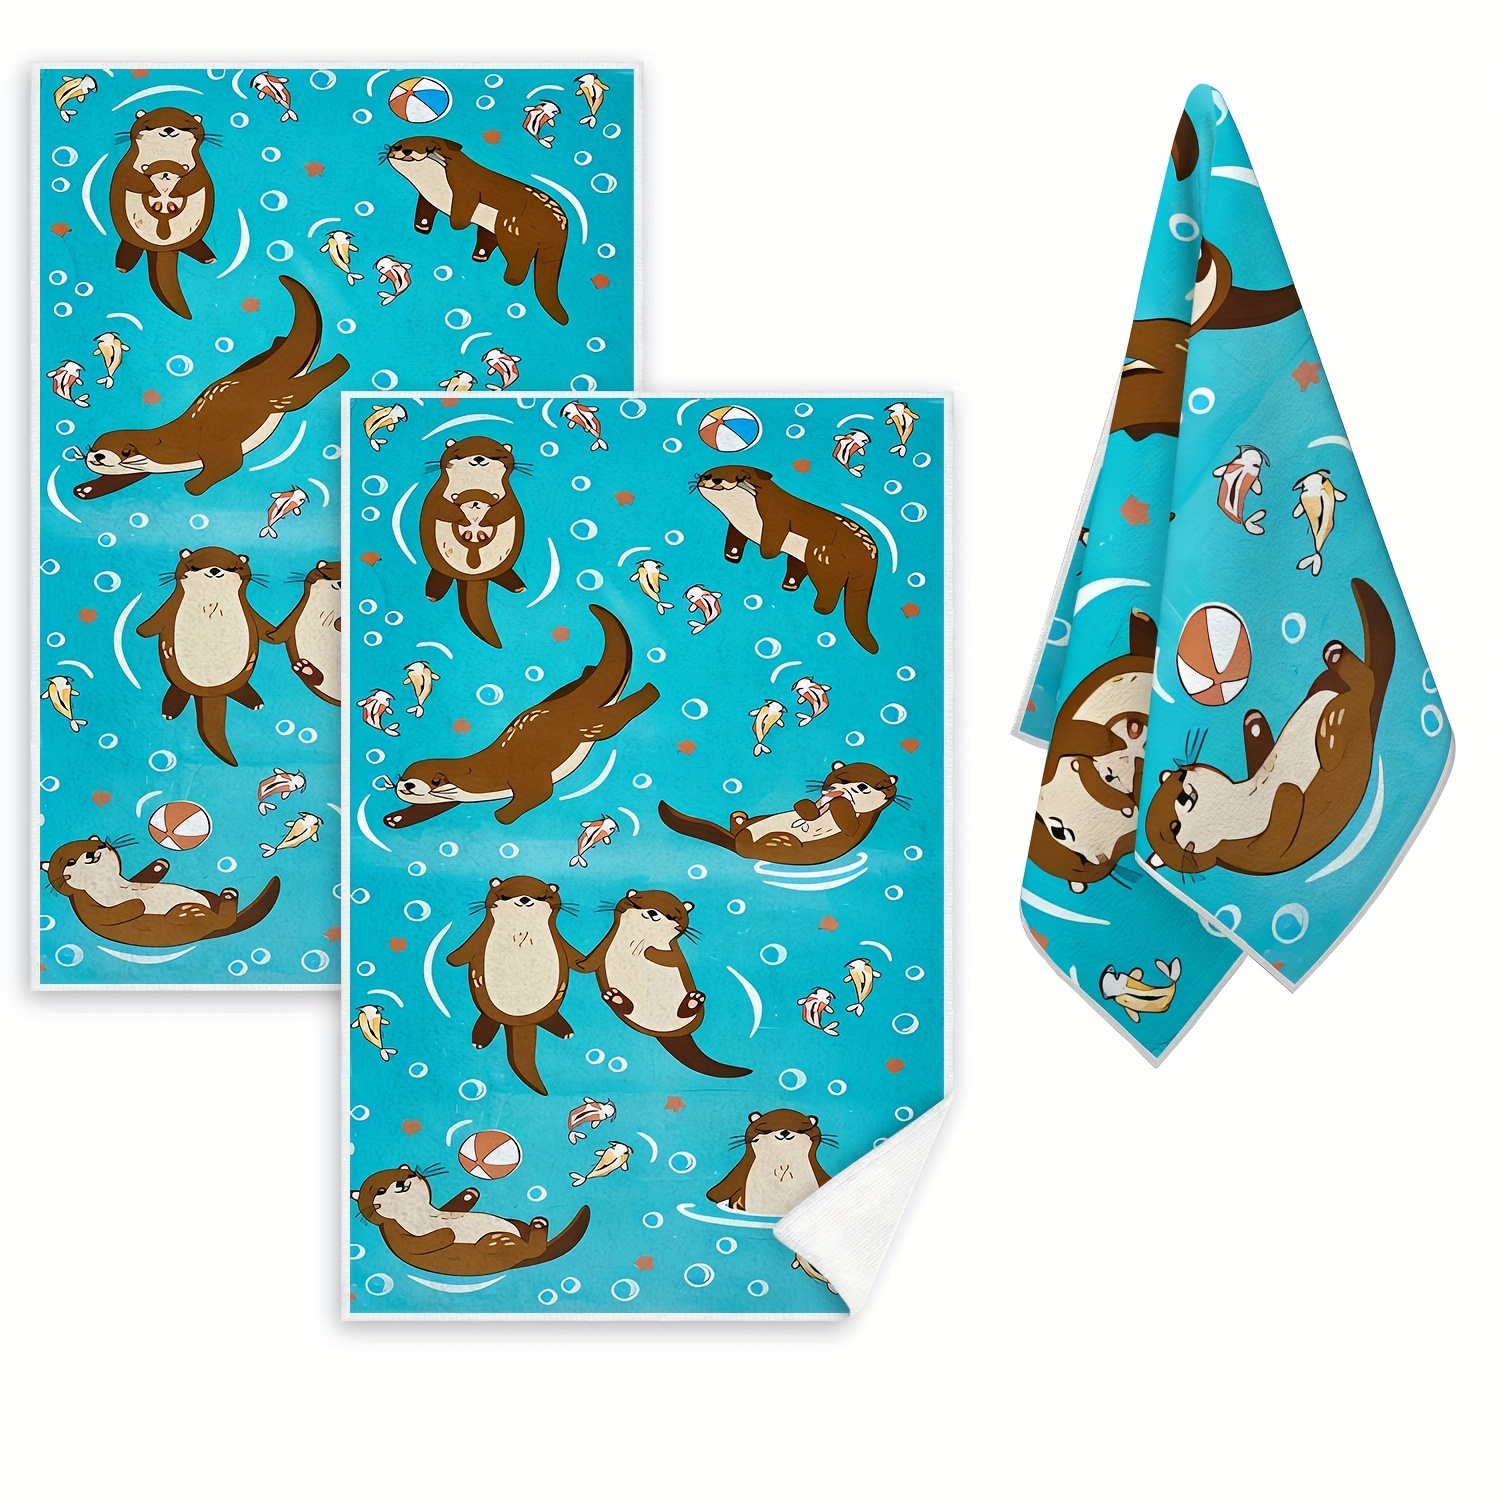 

Ocean-themed Microfiber Dish Towels & Cloths Set Of 2 - Contemporary Style, Machine Washable, Ultra Fine Knit Fabric, Oblong Shape - Durable Cleaning Kitchen Supplies With Playful Otter Design